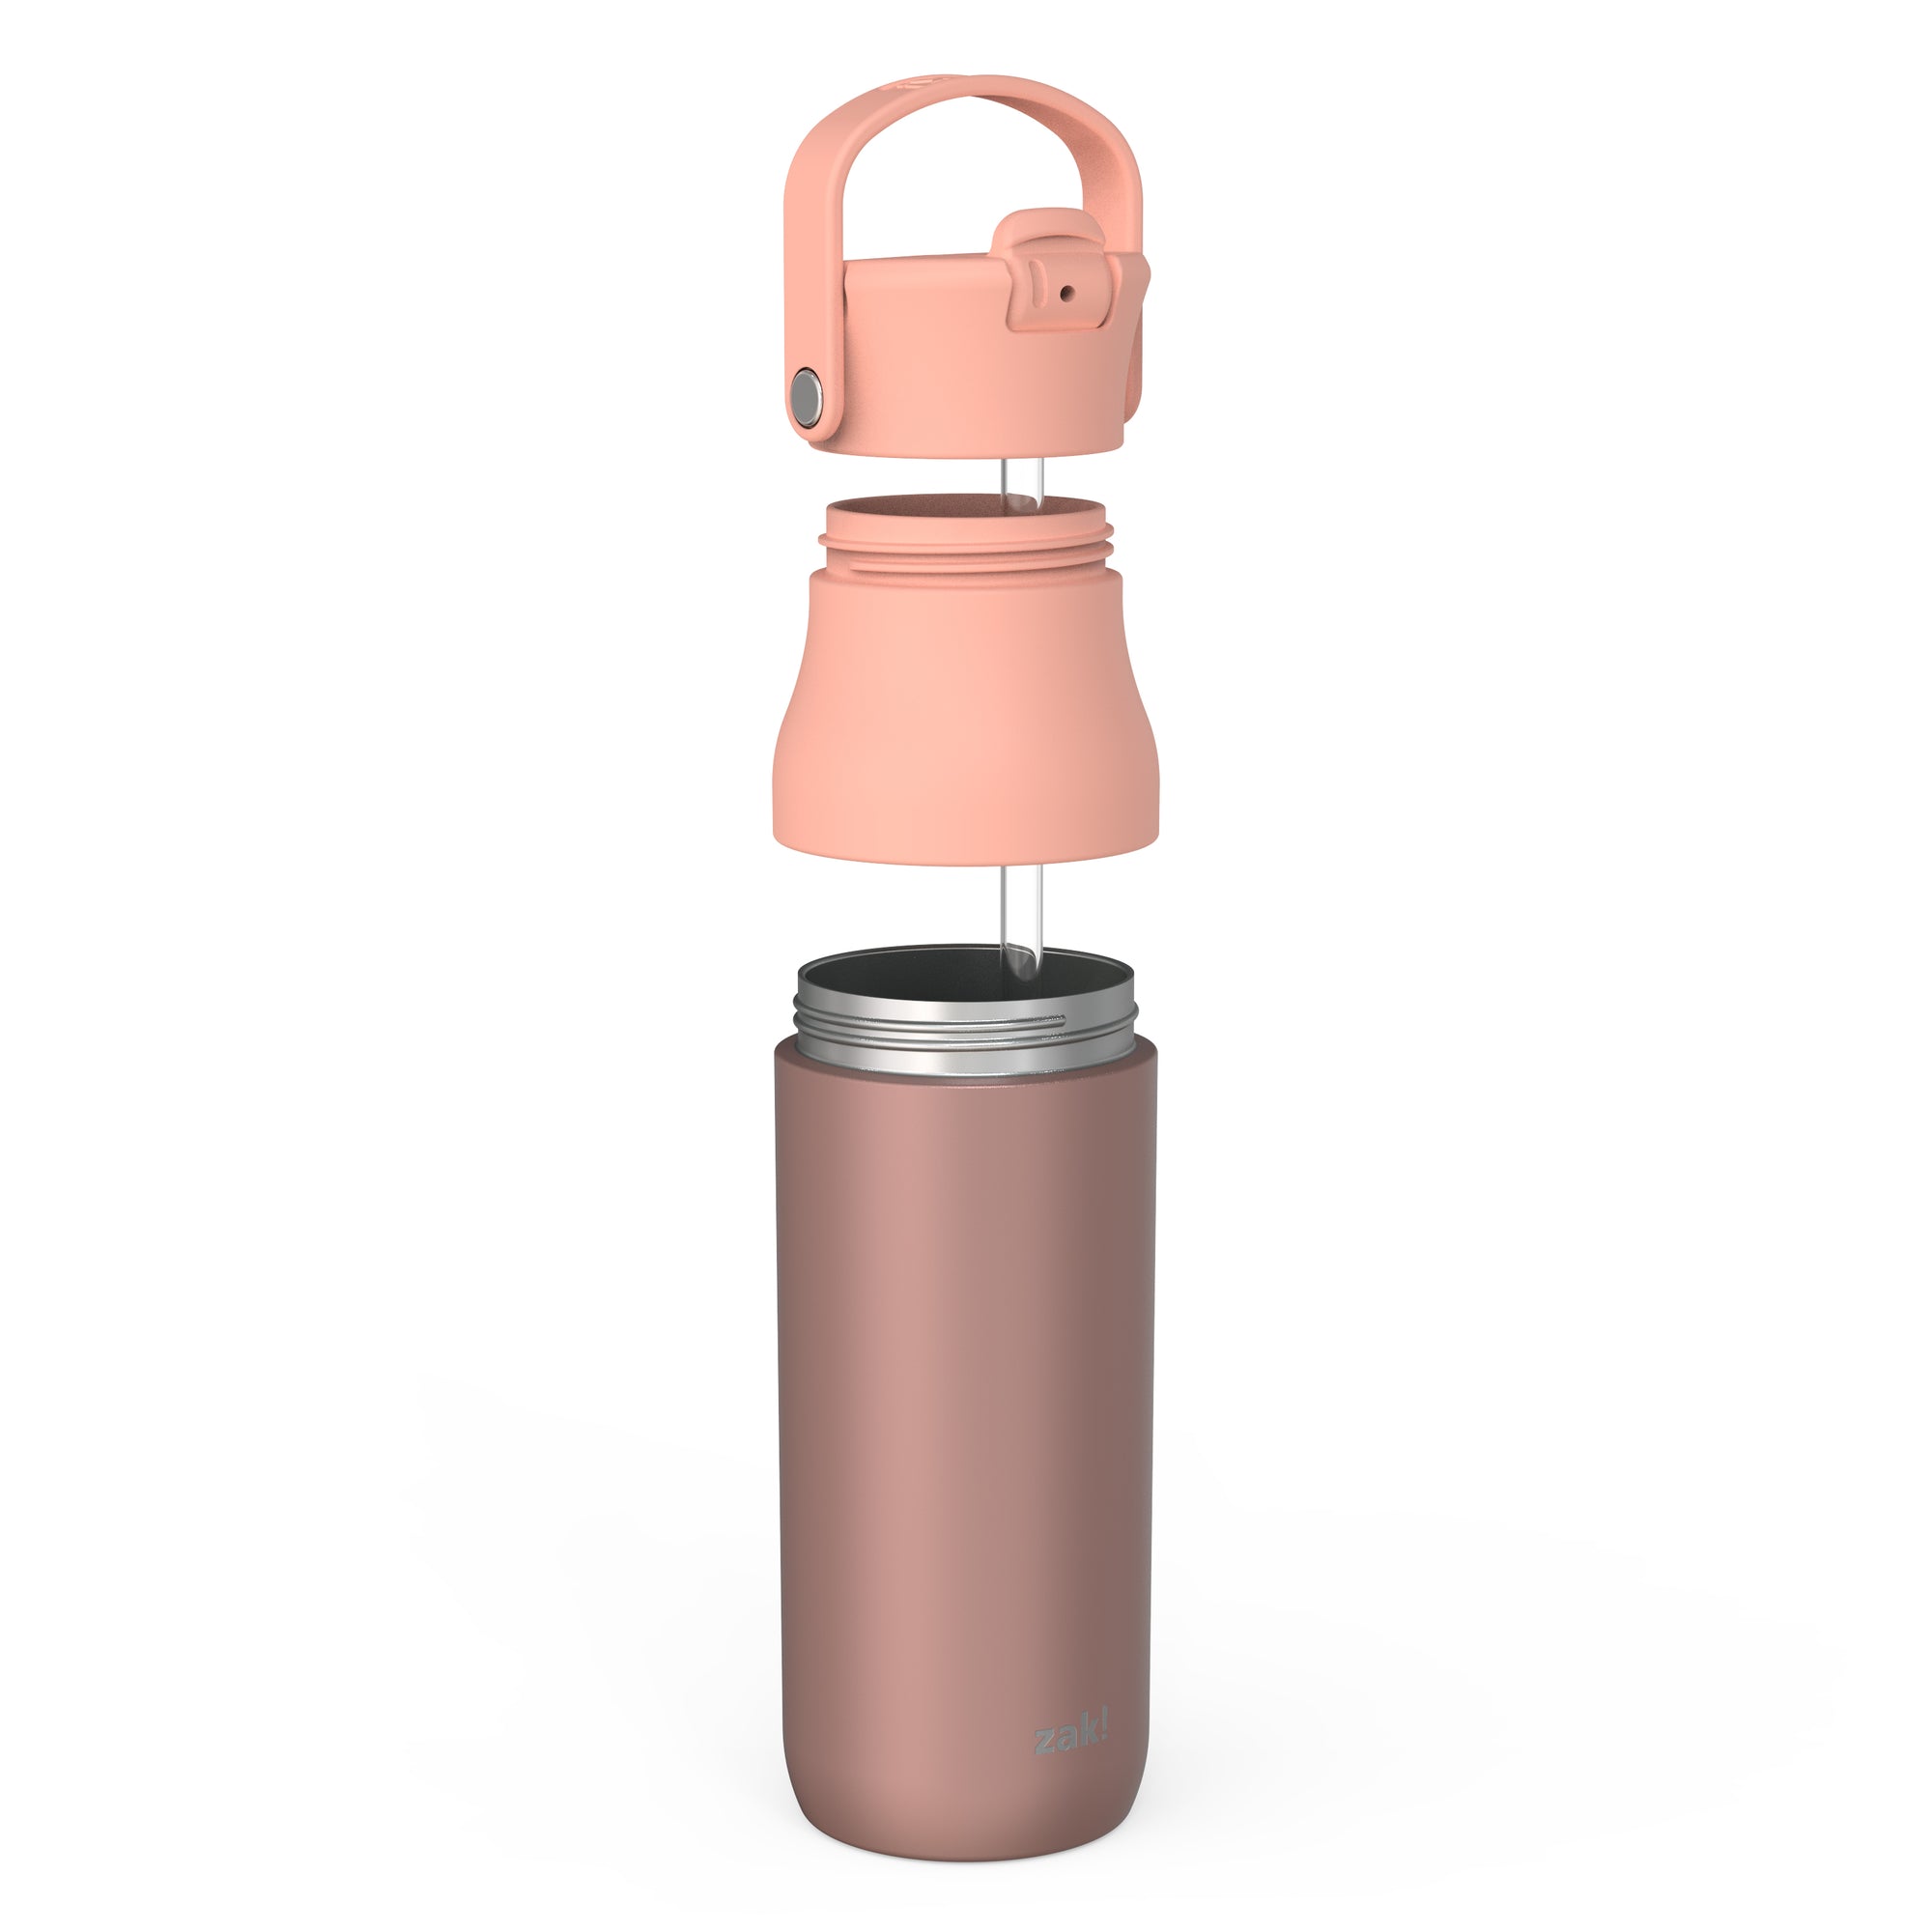 Harmony Recycled Stainless Steel Insulated Water Bottle with Flip-Up Straw Spout - Coral, 32 ounces